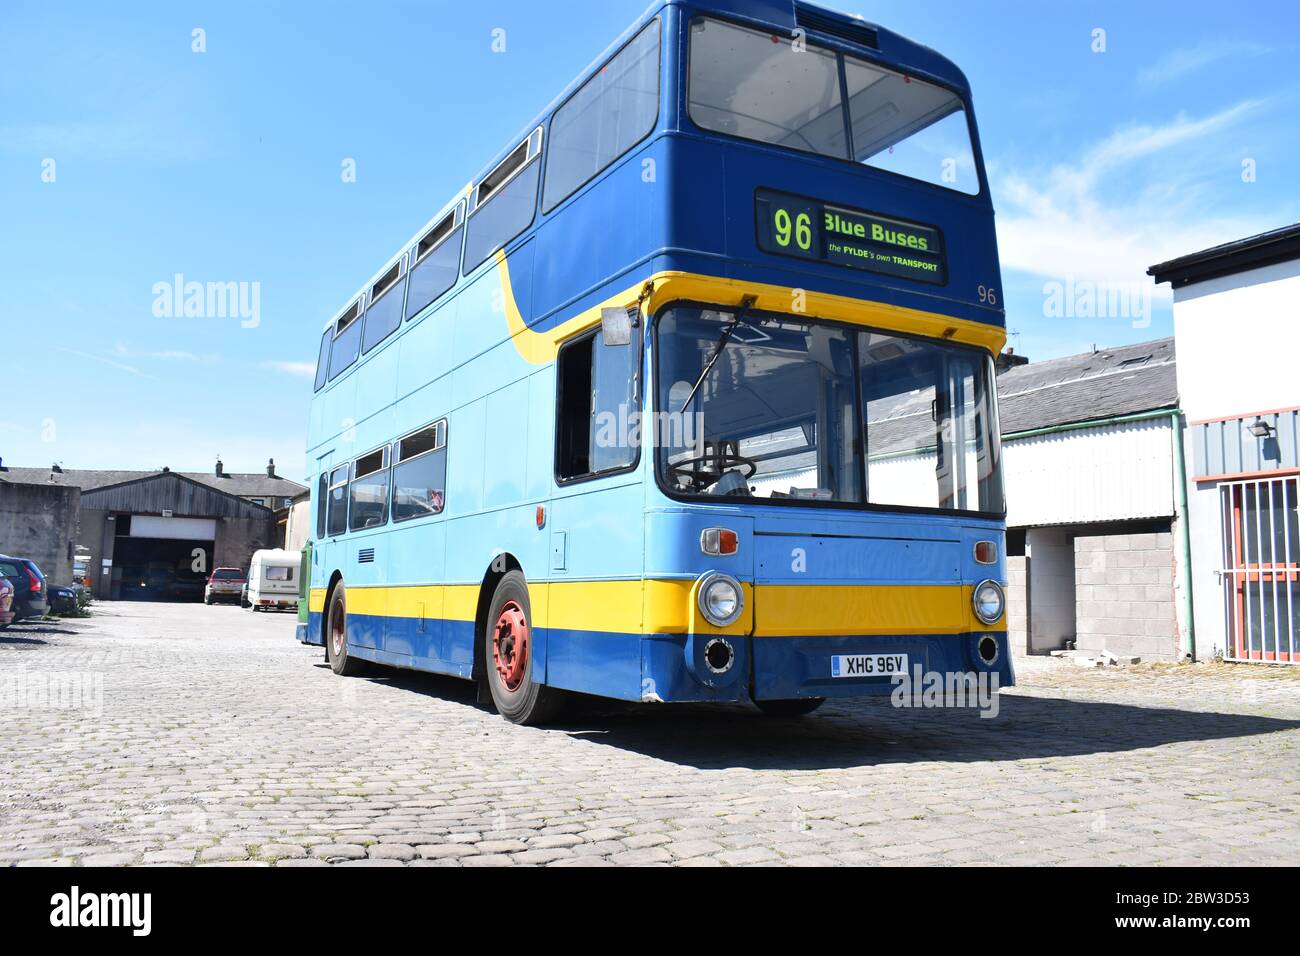 96 a Leyland Atlantean parked on the Road Stock Photo